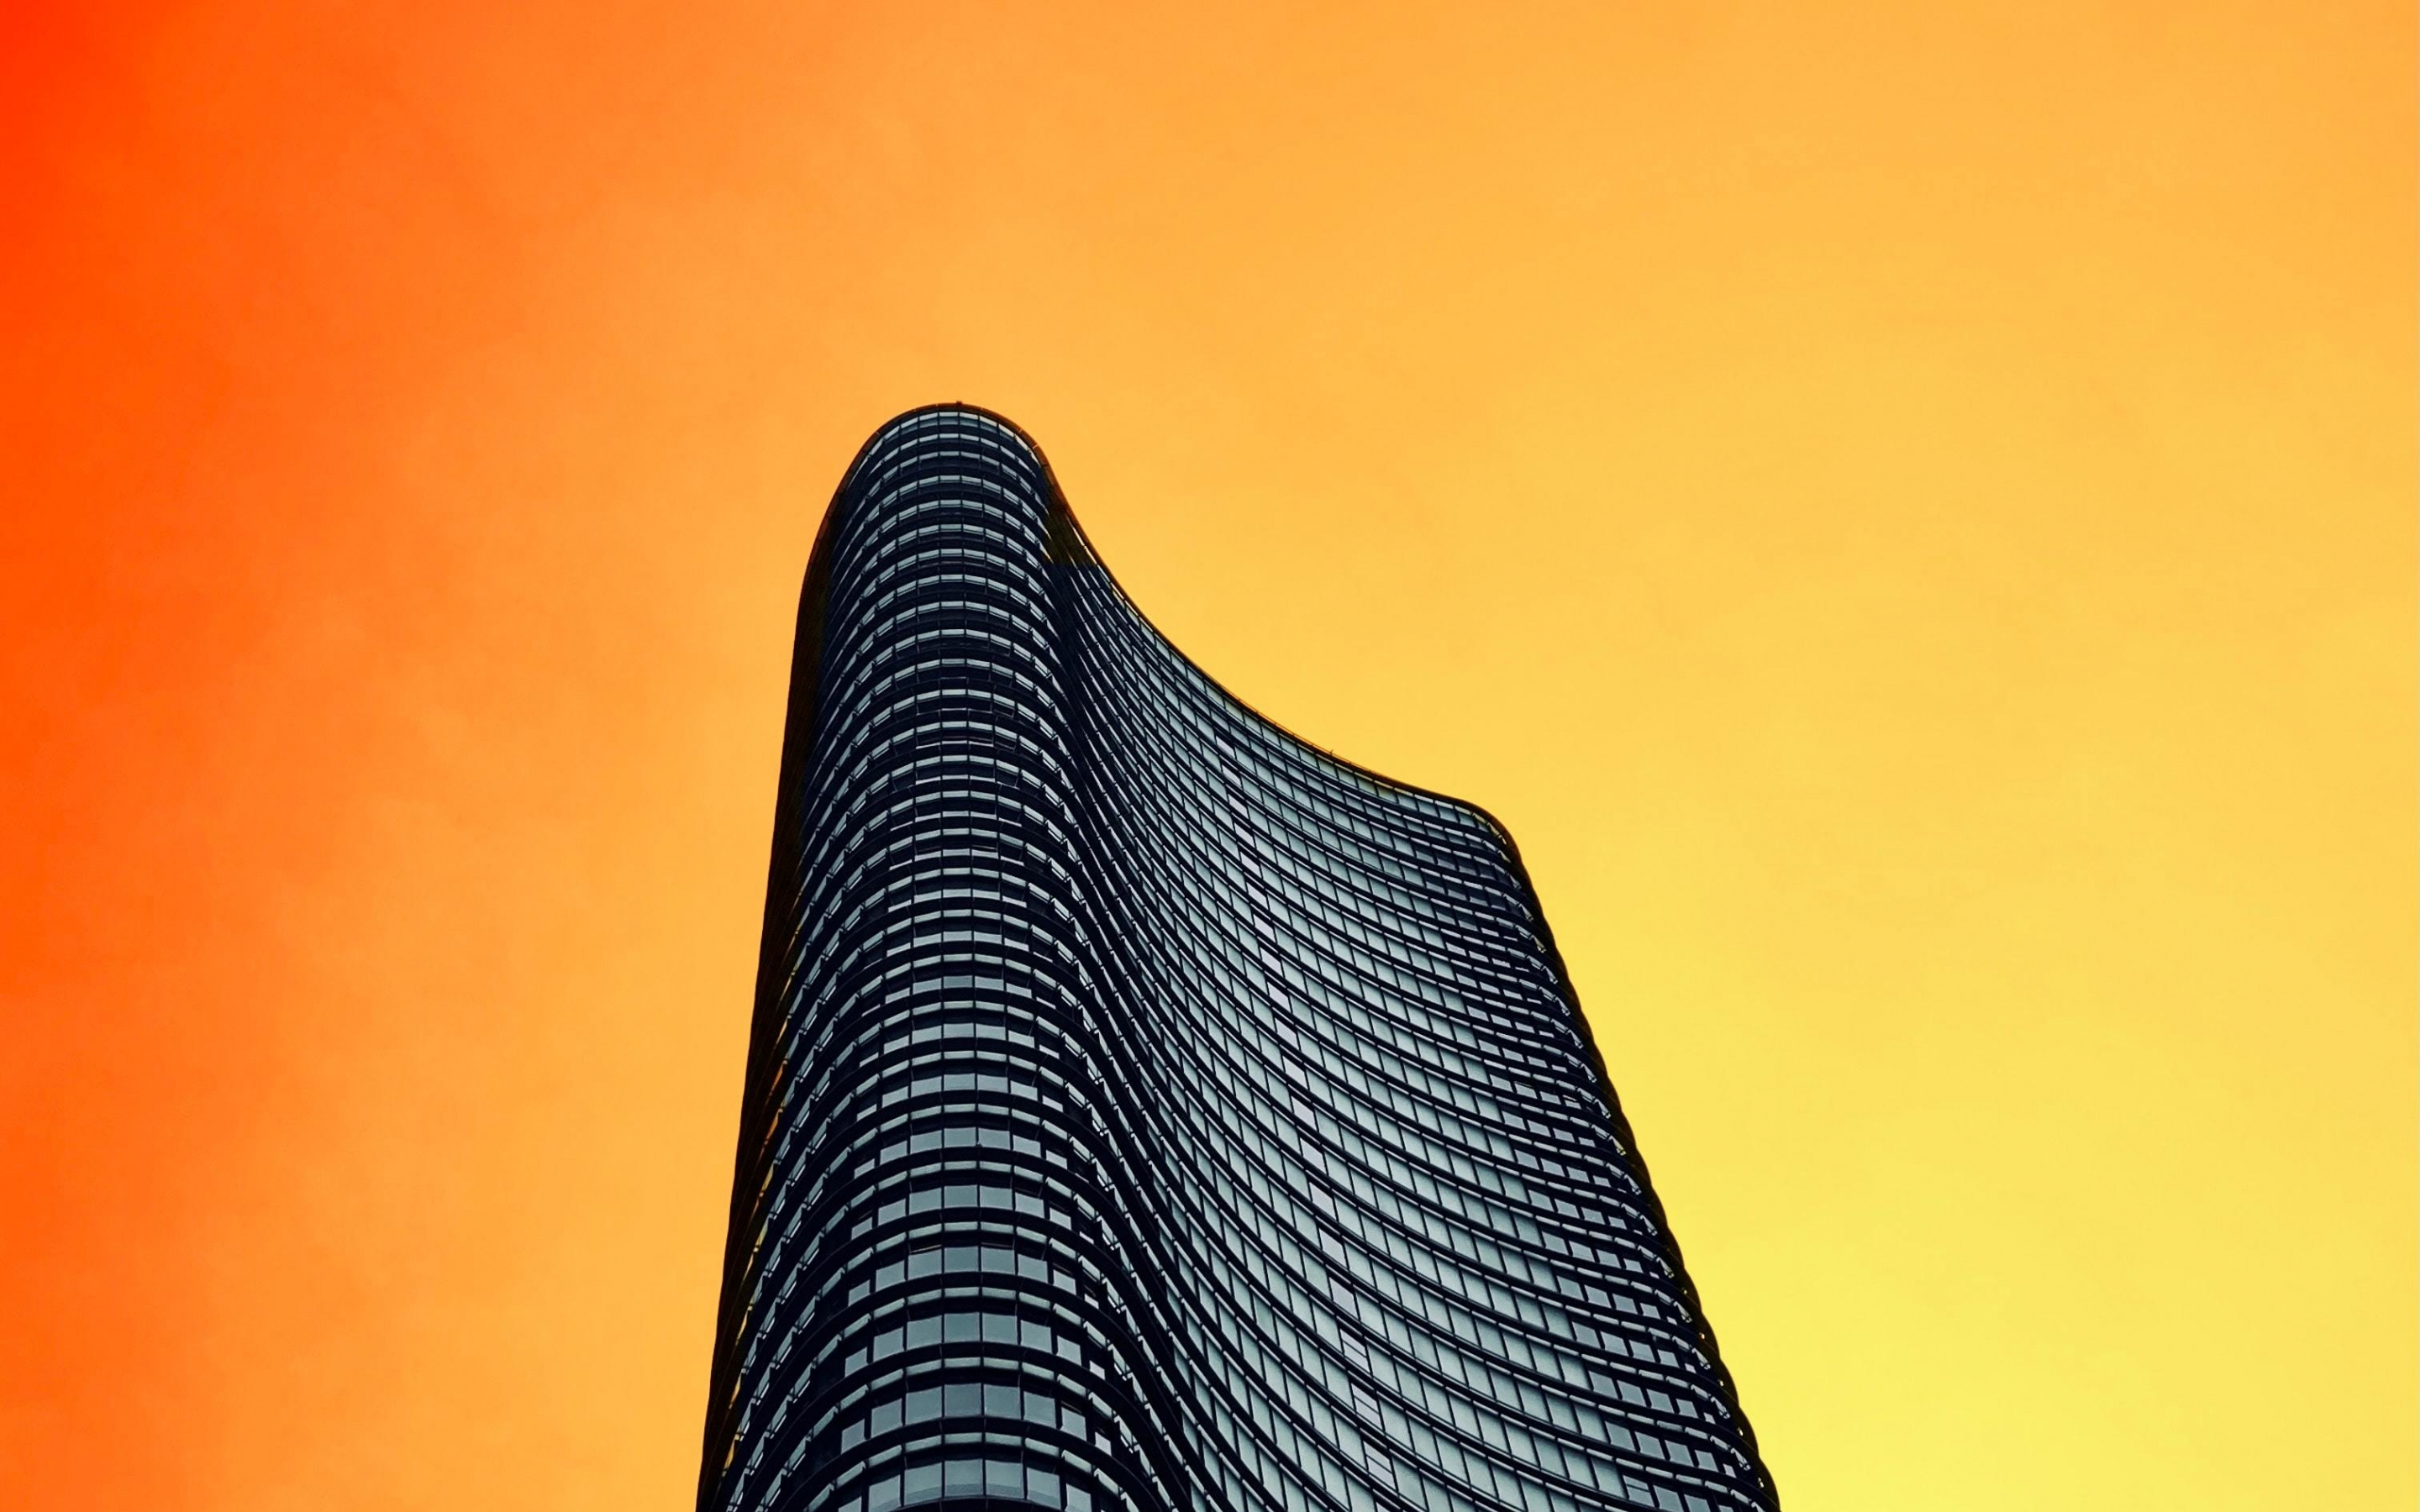 High tower building, architecture, 2880x1800 wallpaper